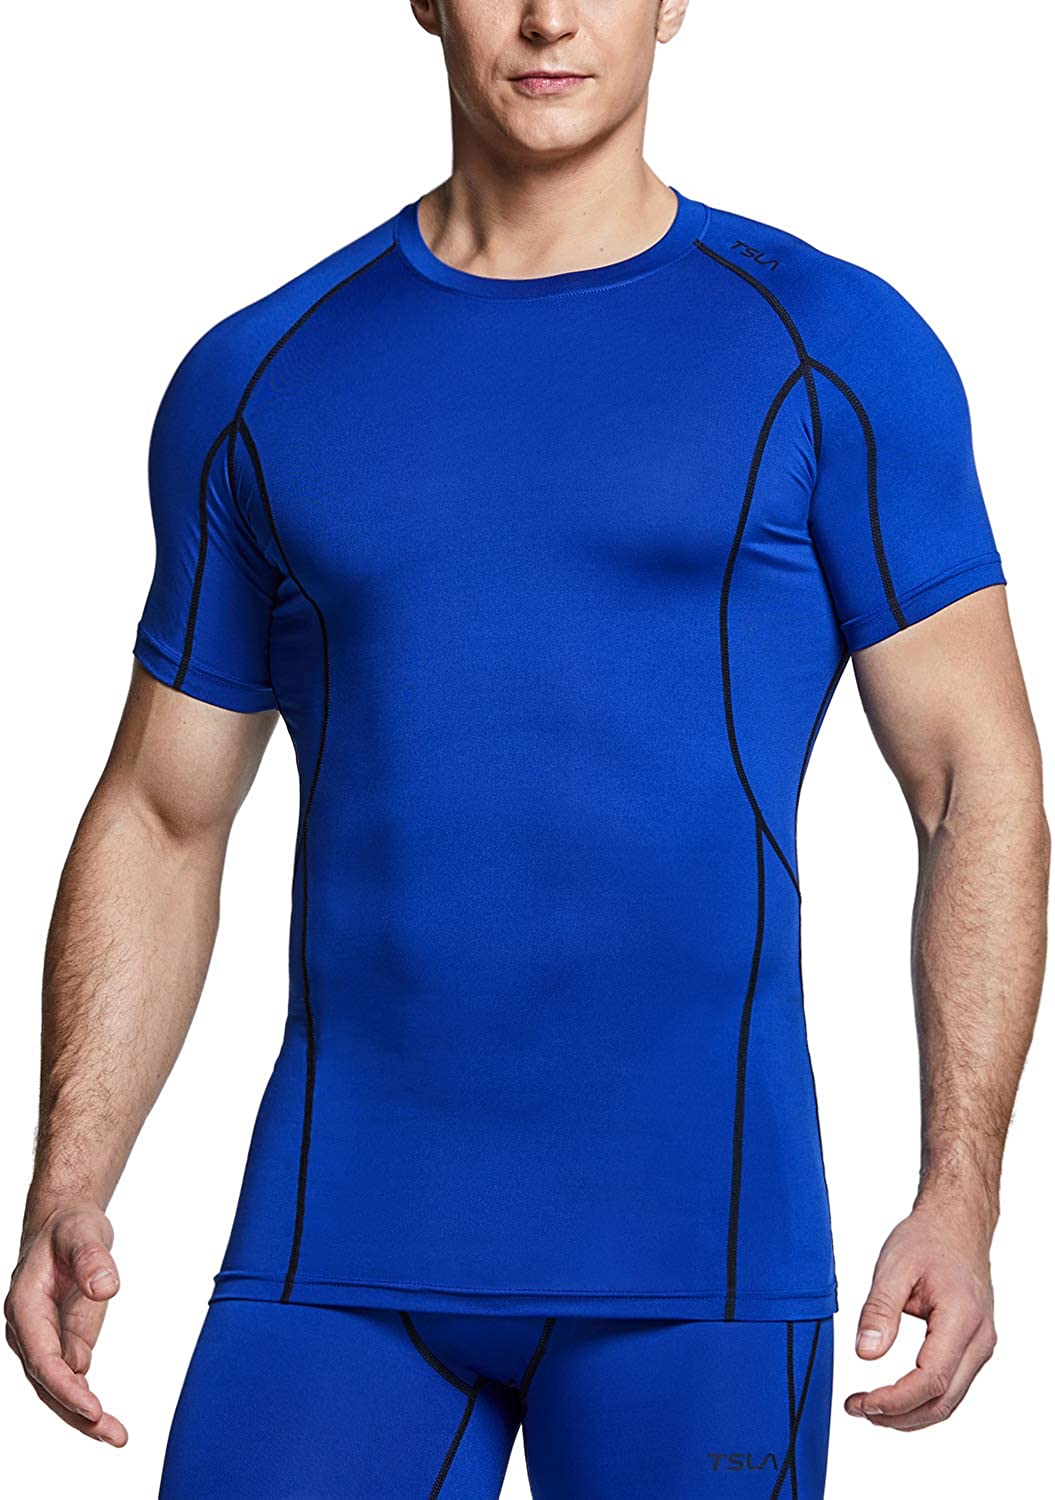 Athletic Workout Shirt TSLA Men's Cool Dry Short Sleeve Compression Shirts Active Sports Base Layer T-Shirts